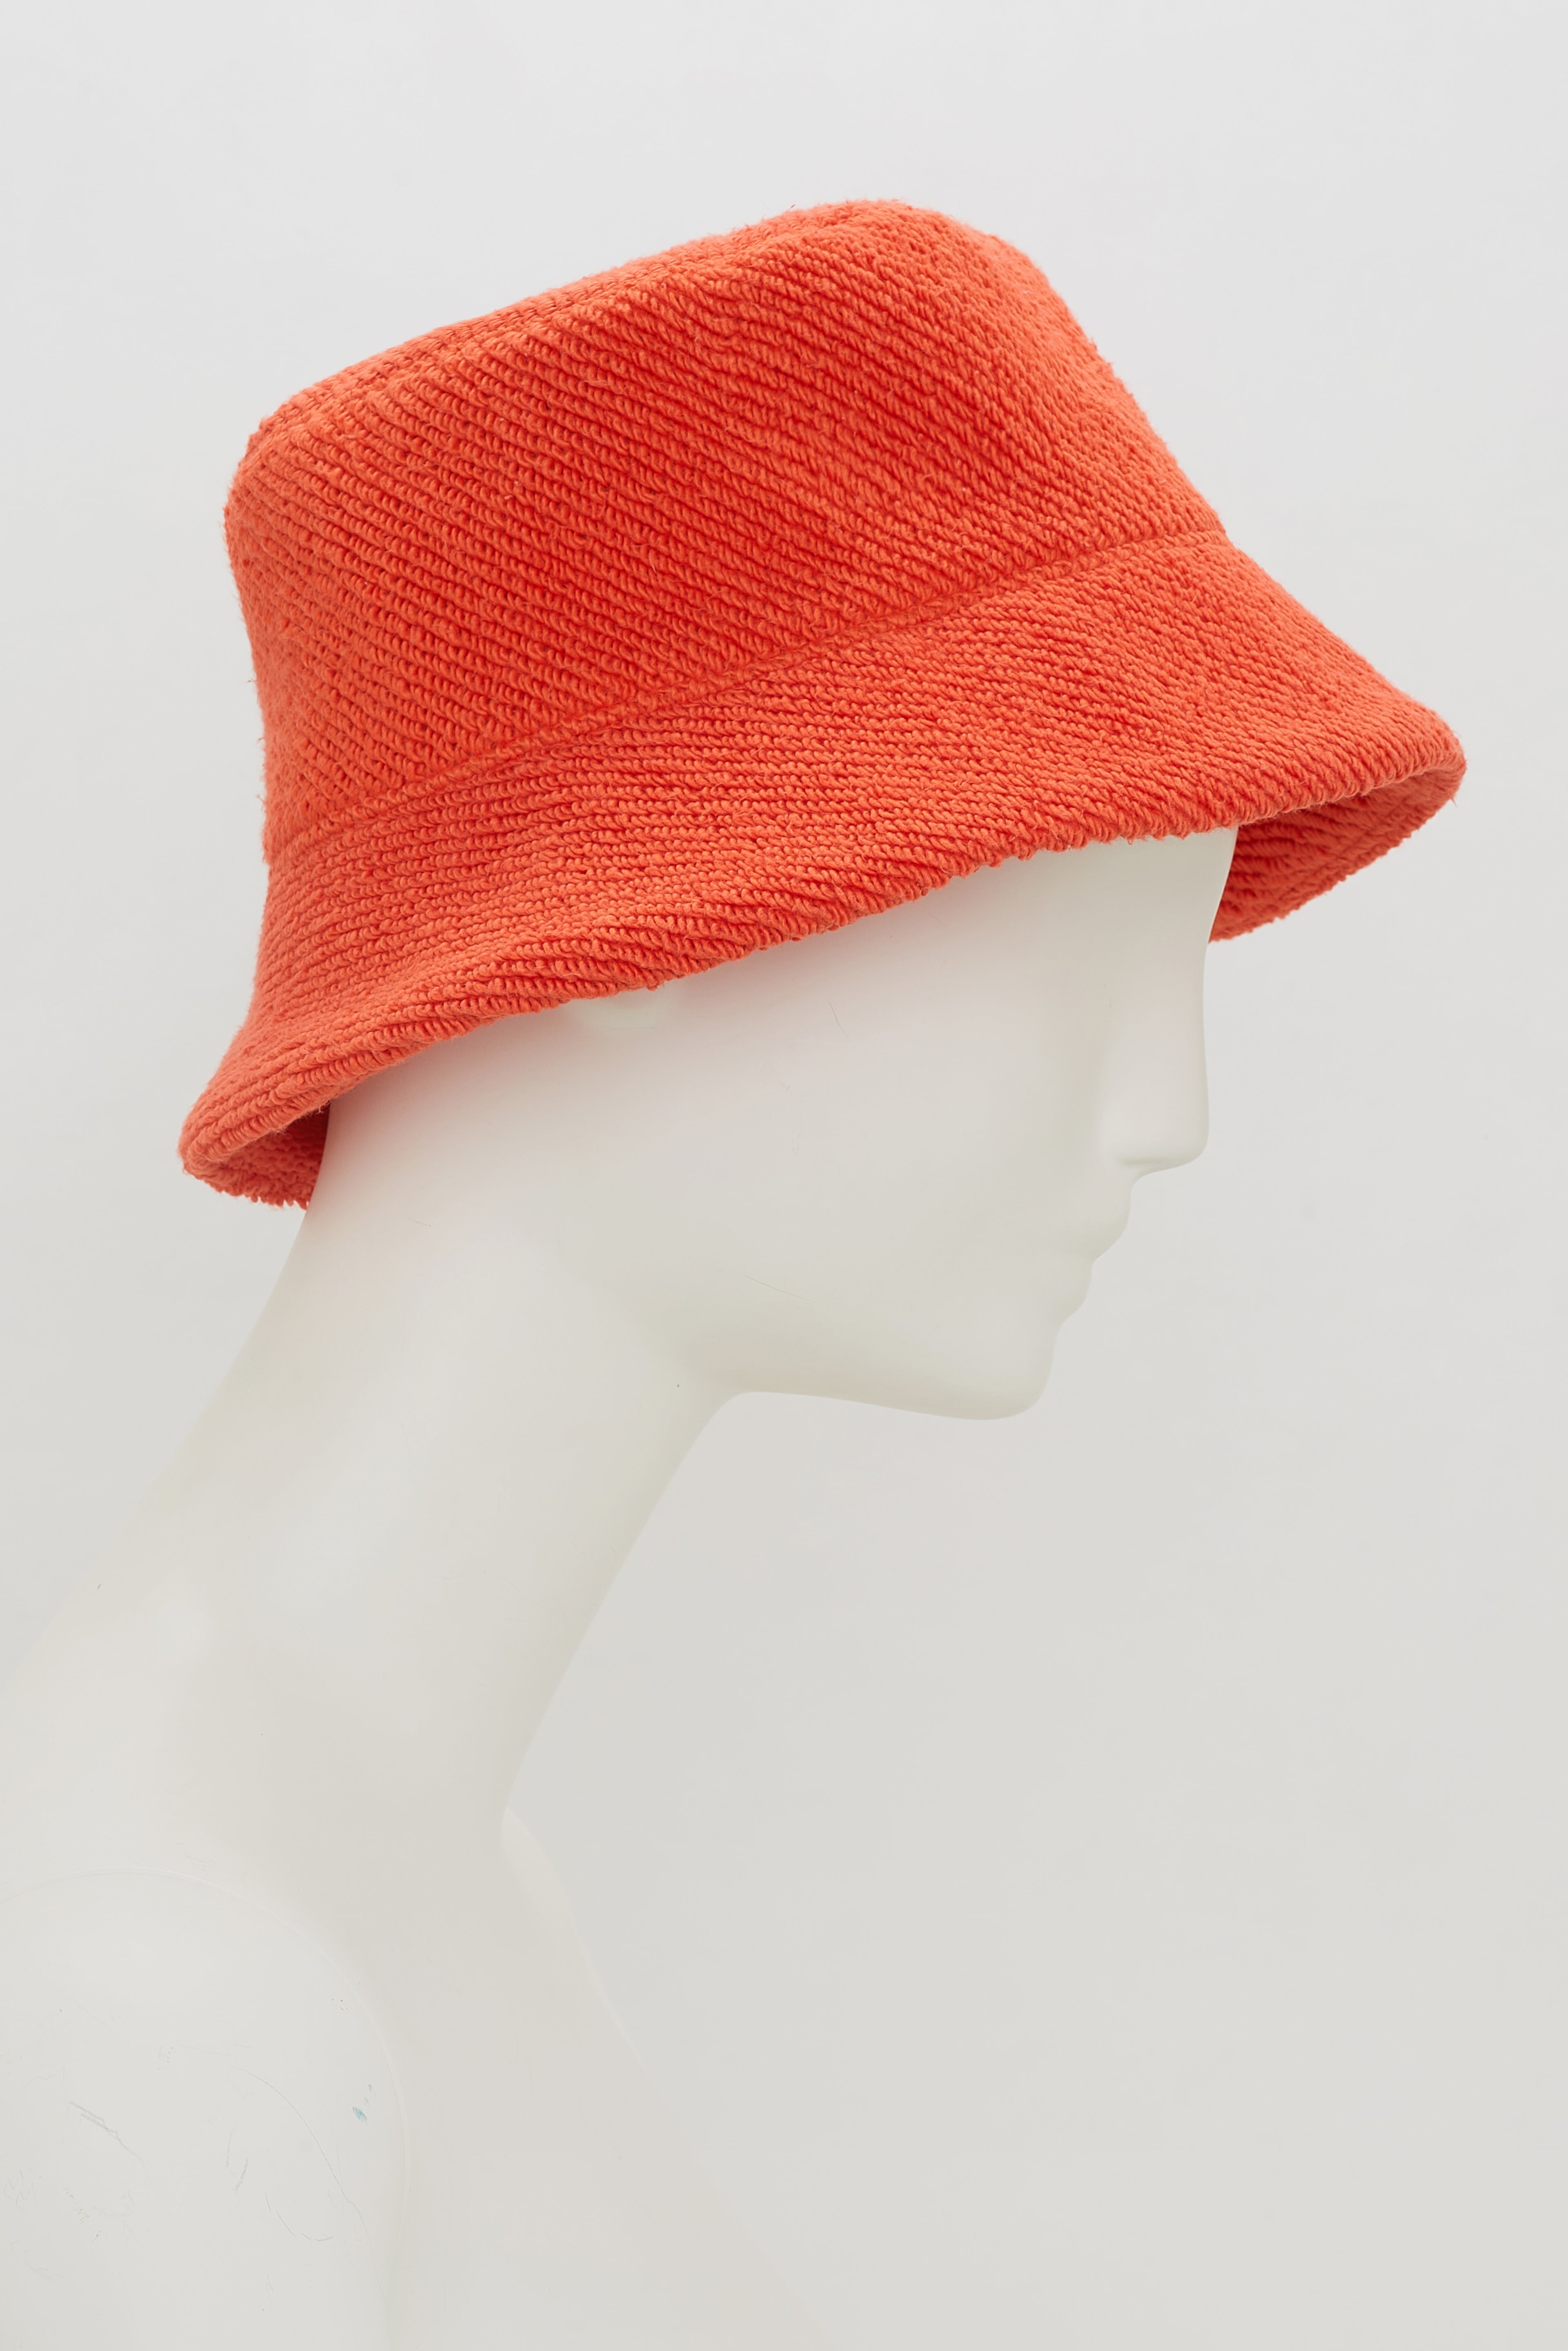 Dorothee-Schumacher-OUTLET-SALE-MODERN-TOWELLING-hat-Accessoires-OS-spiced-orange-ARCHIVE-COLLECTION-3.jpg